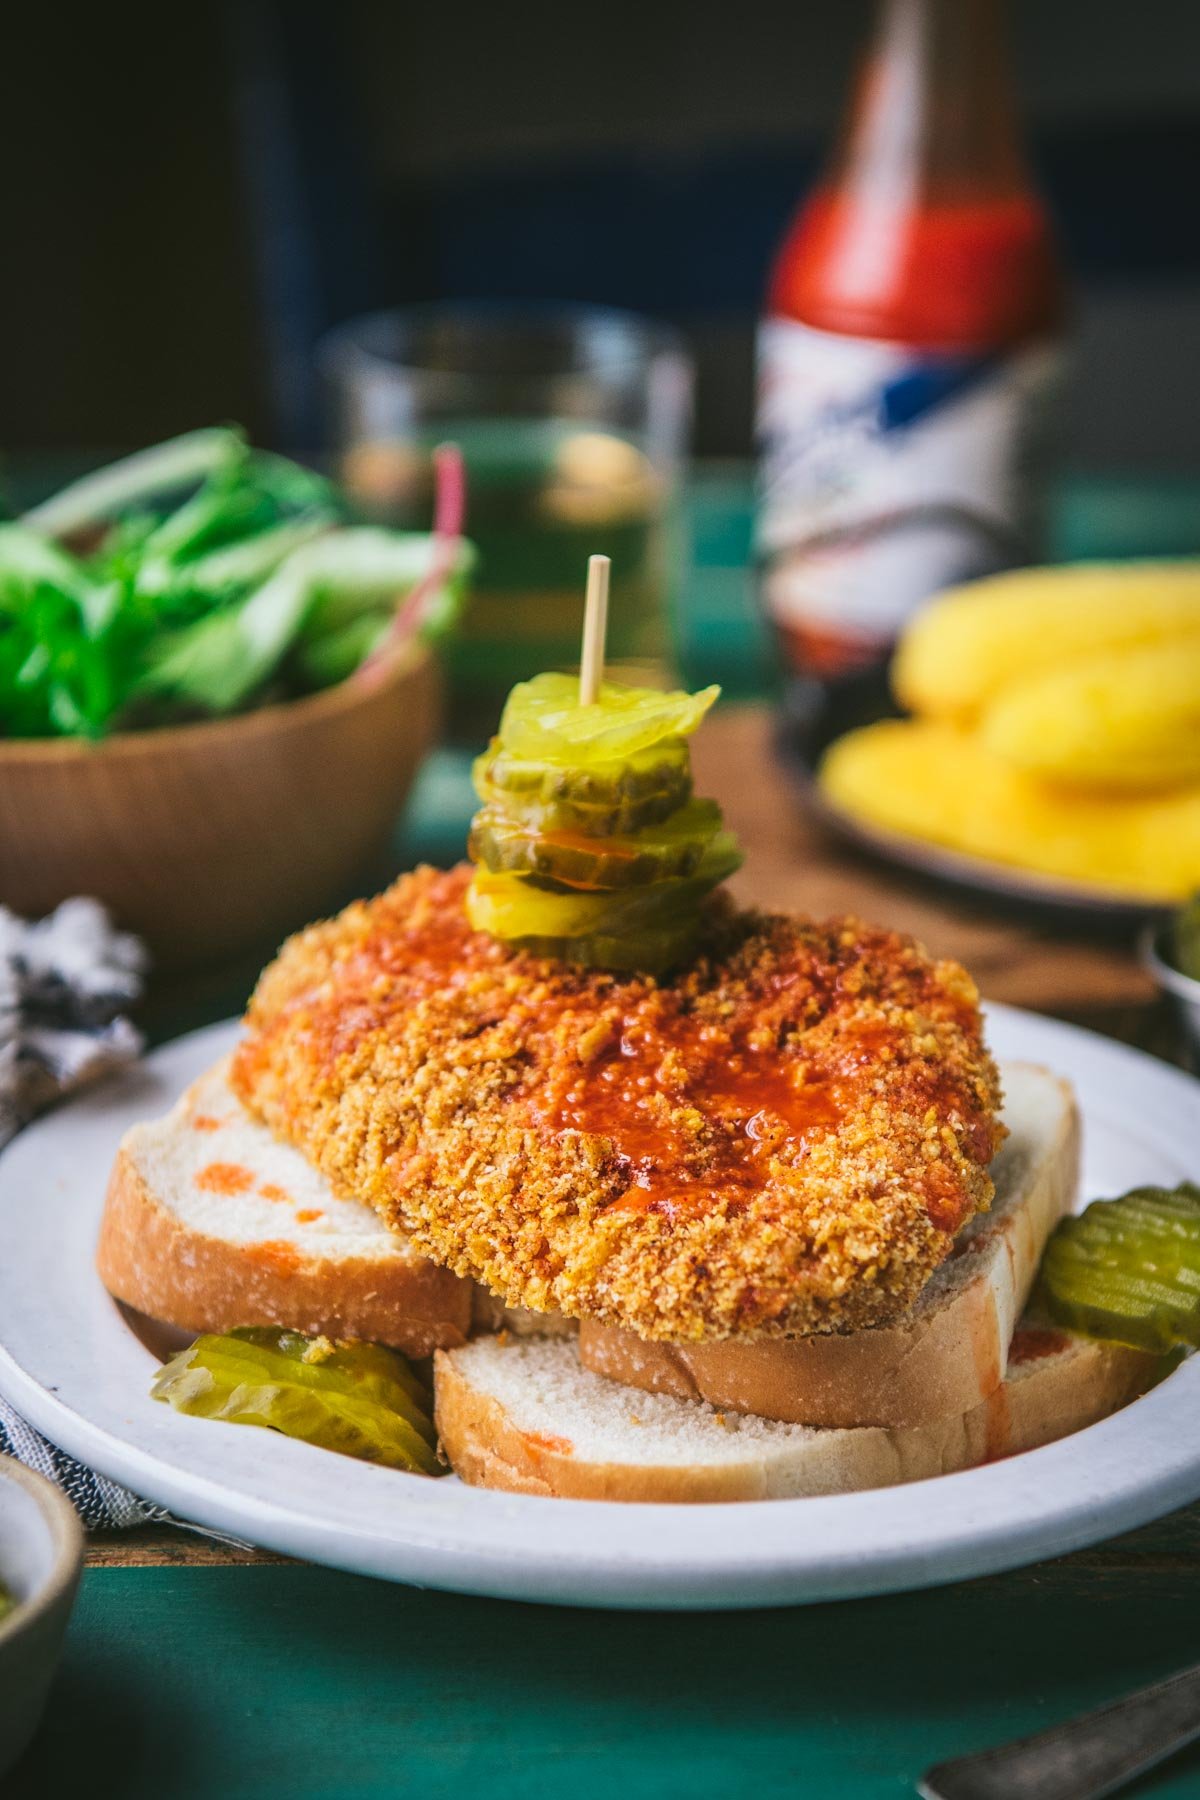 Side shot of a baked nashville hot chicken recipe served on a white plate with white bread and sliced pickles.